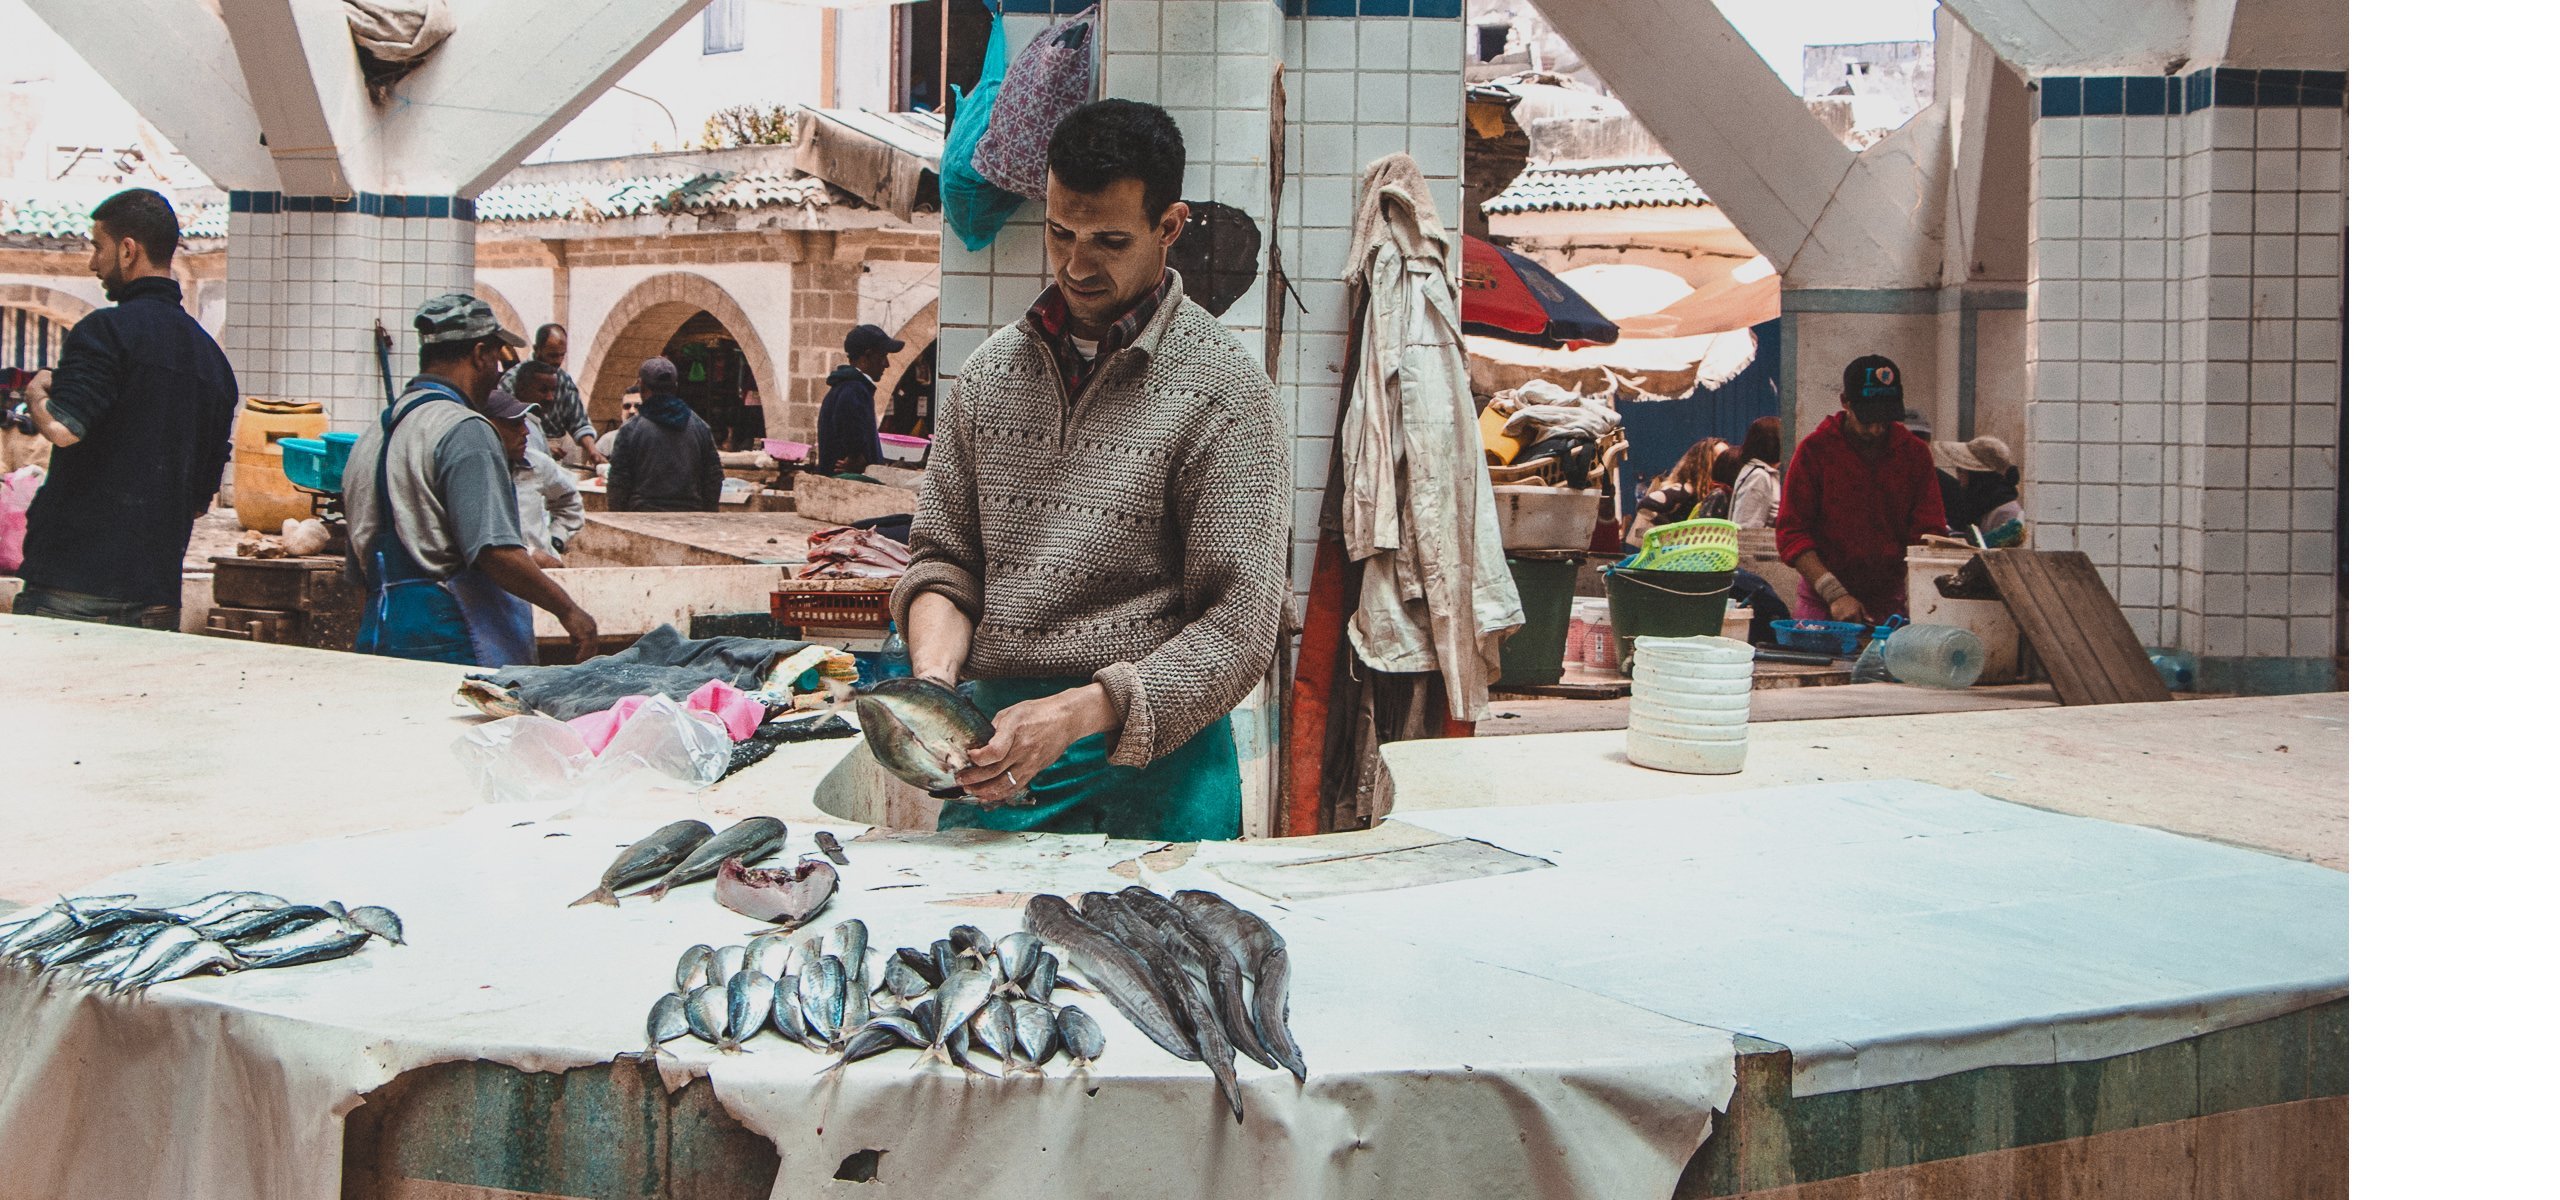 A man cleans fish at the Marche aux Poissons in Essaouira, Morocco | Beyond the Tagine: 11 Foods and Drinks of Morocco 